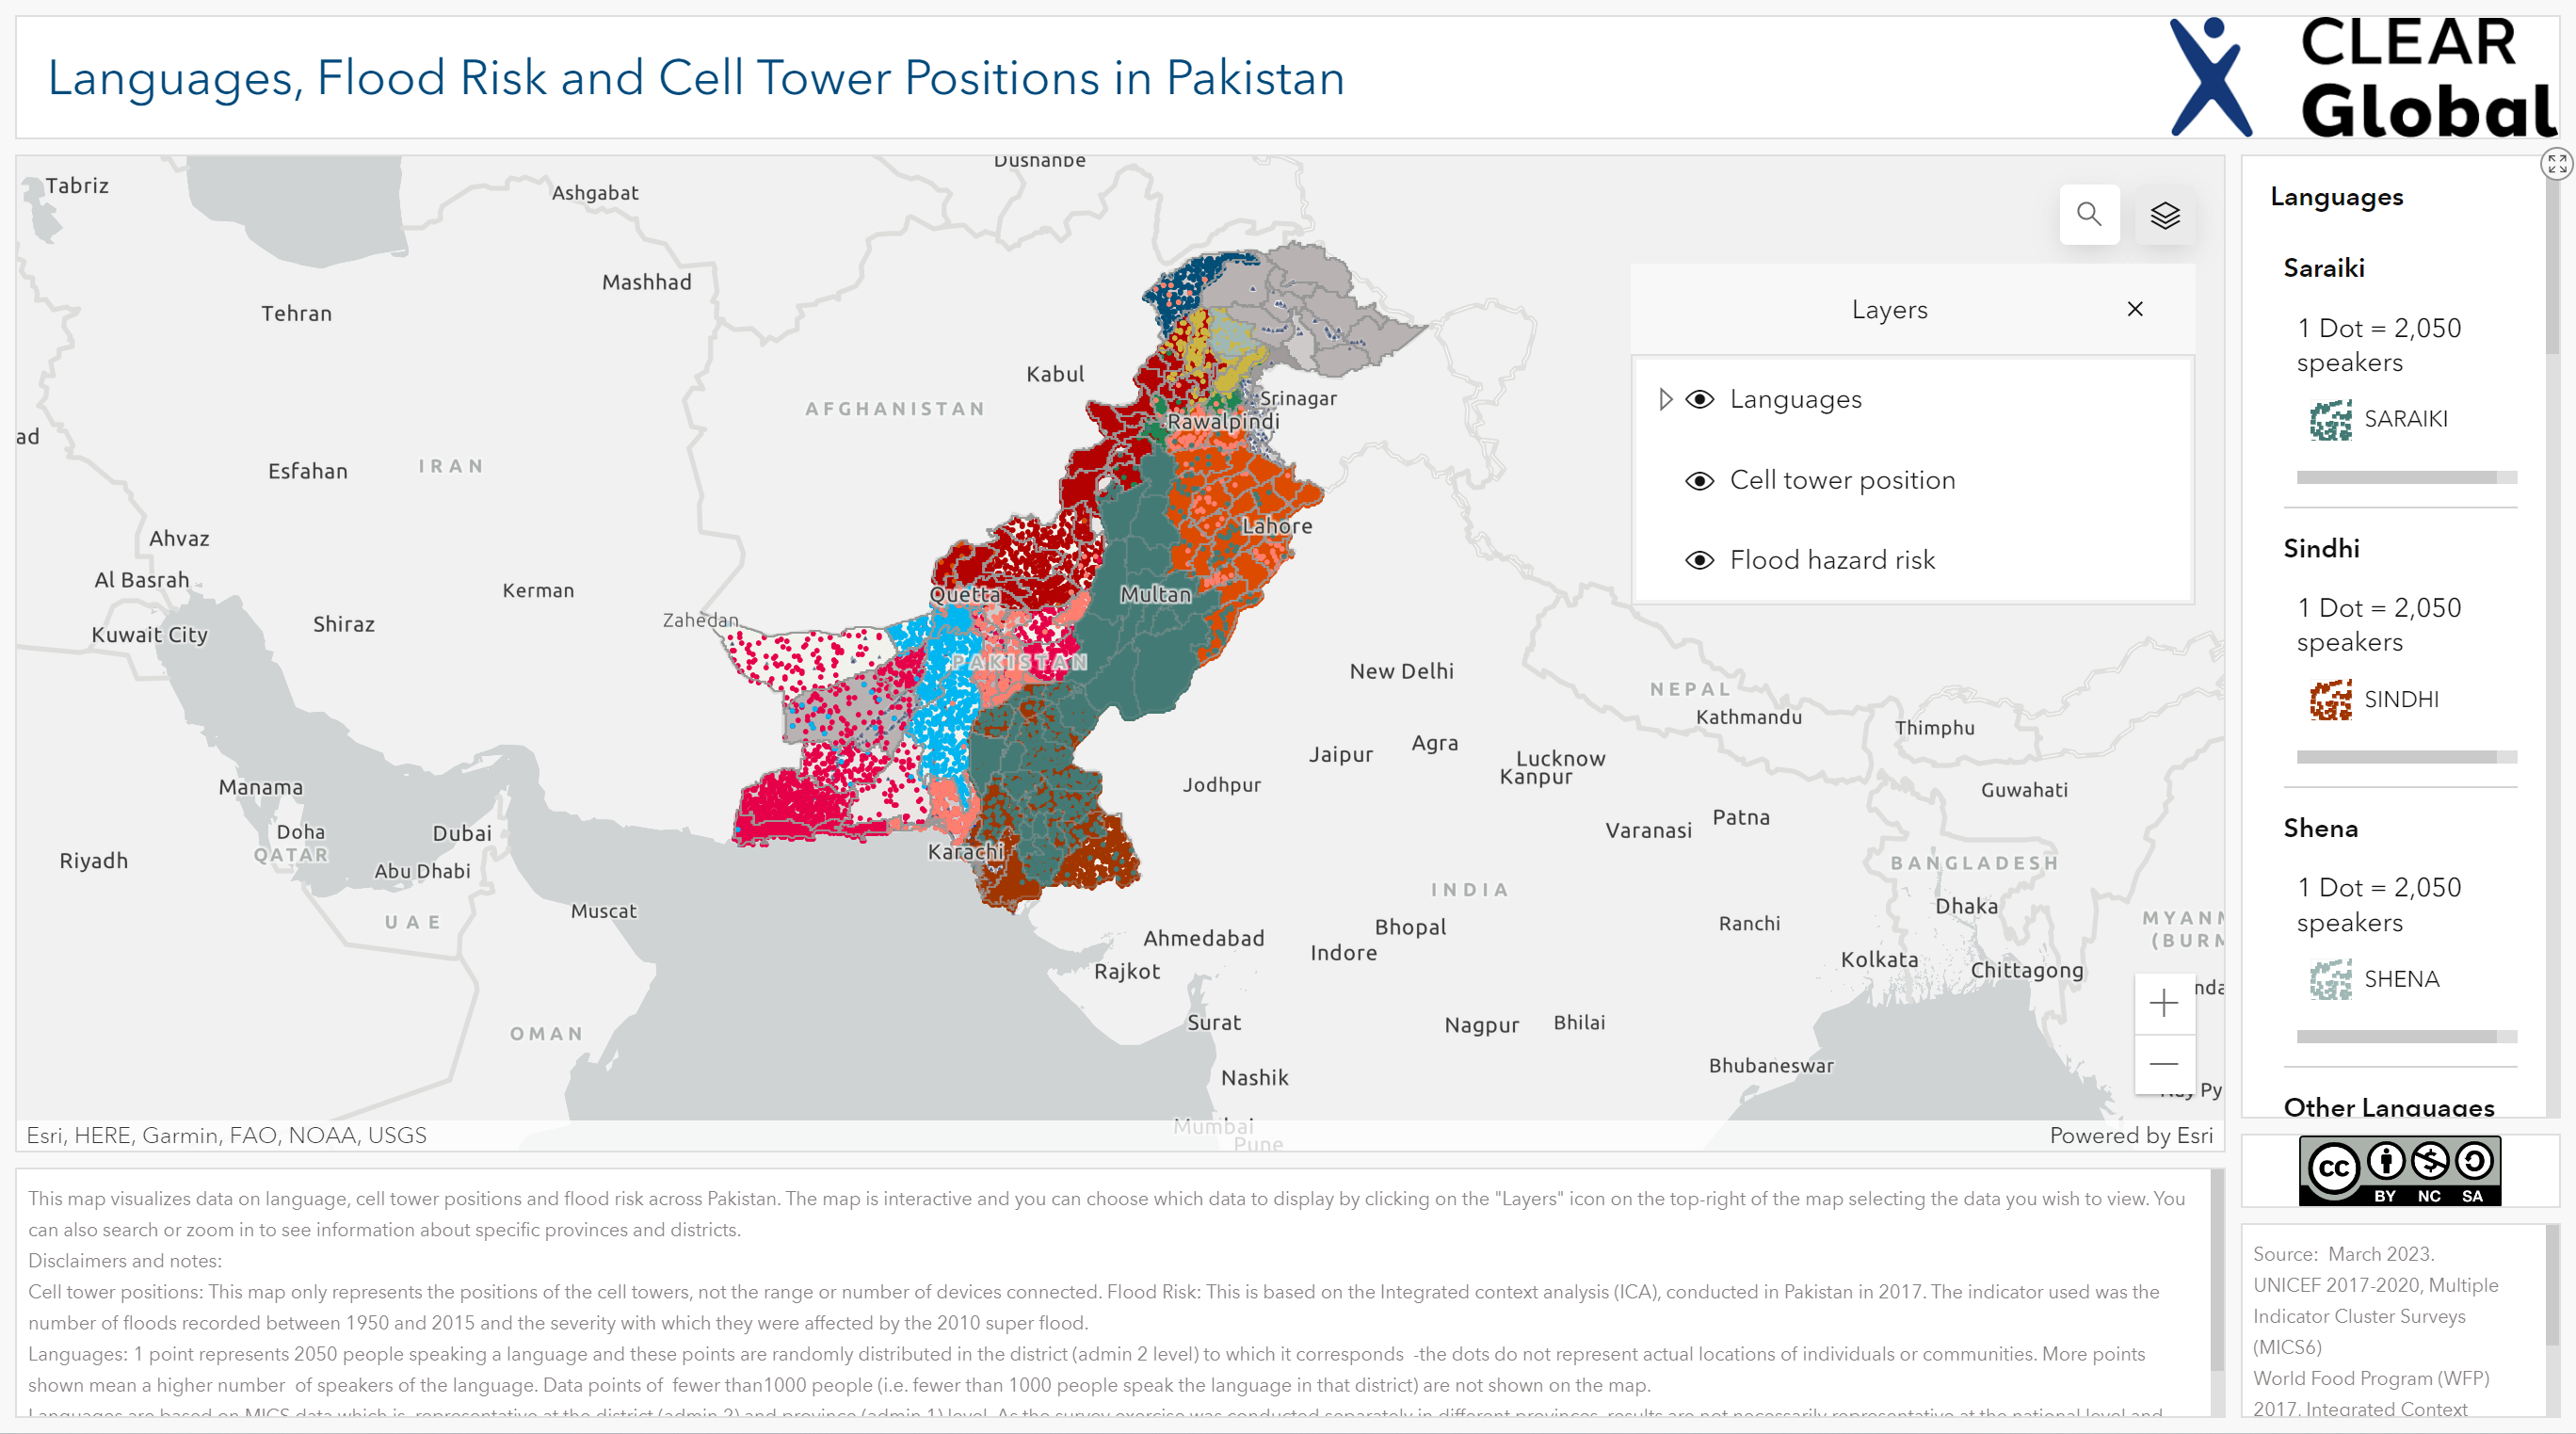 Languages, Flood Risk and Cell Tower Positions in Pakistan